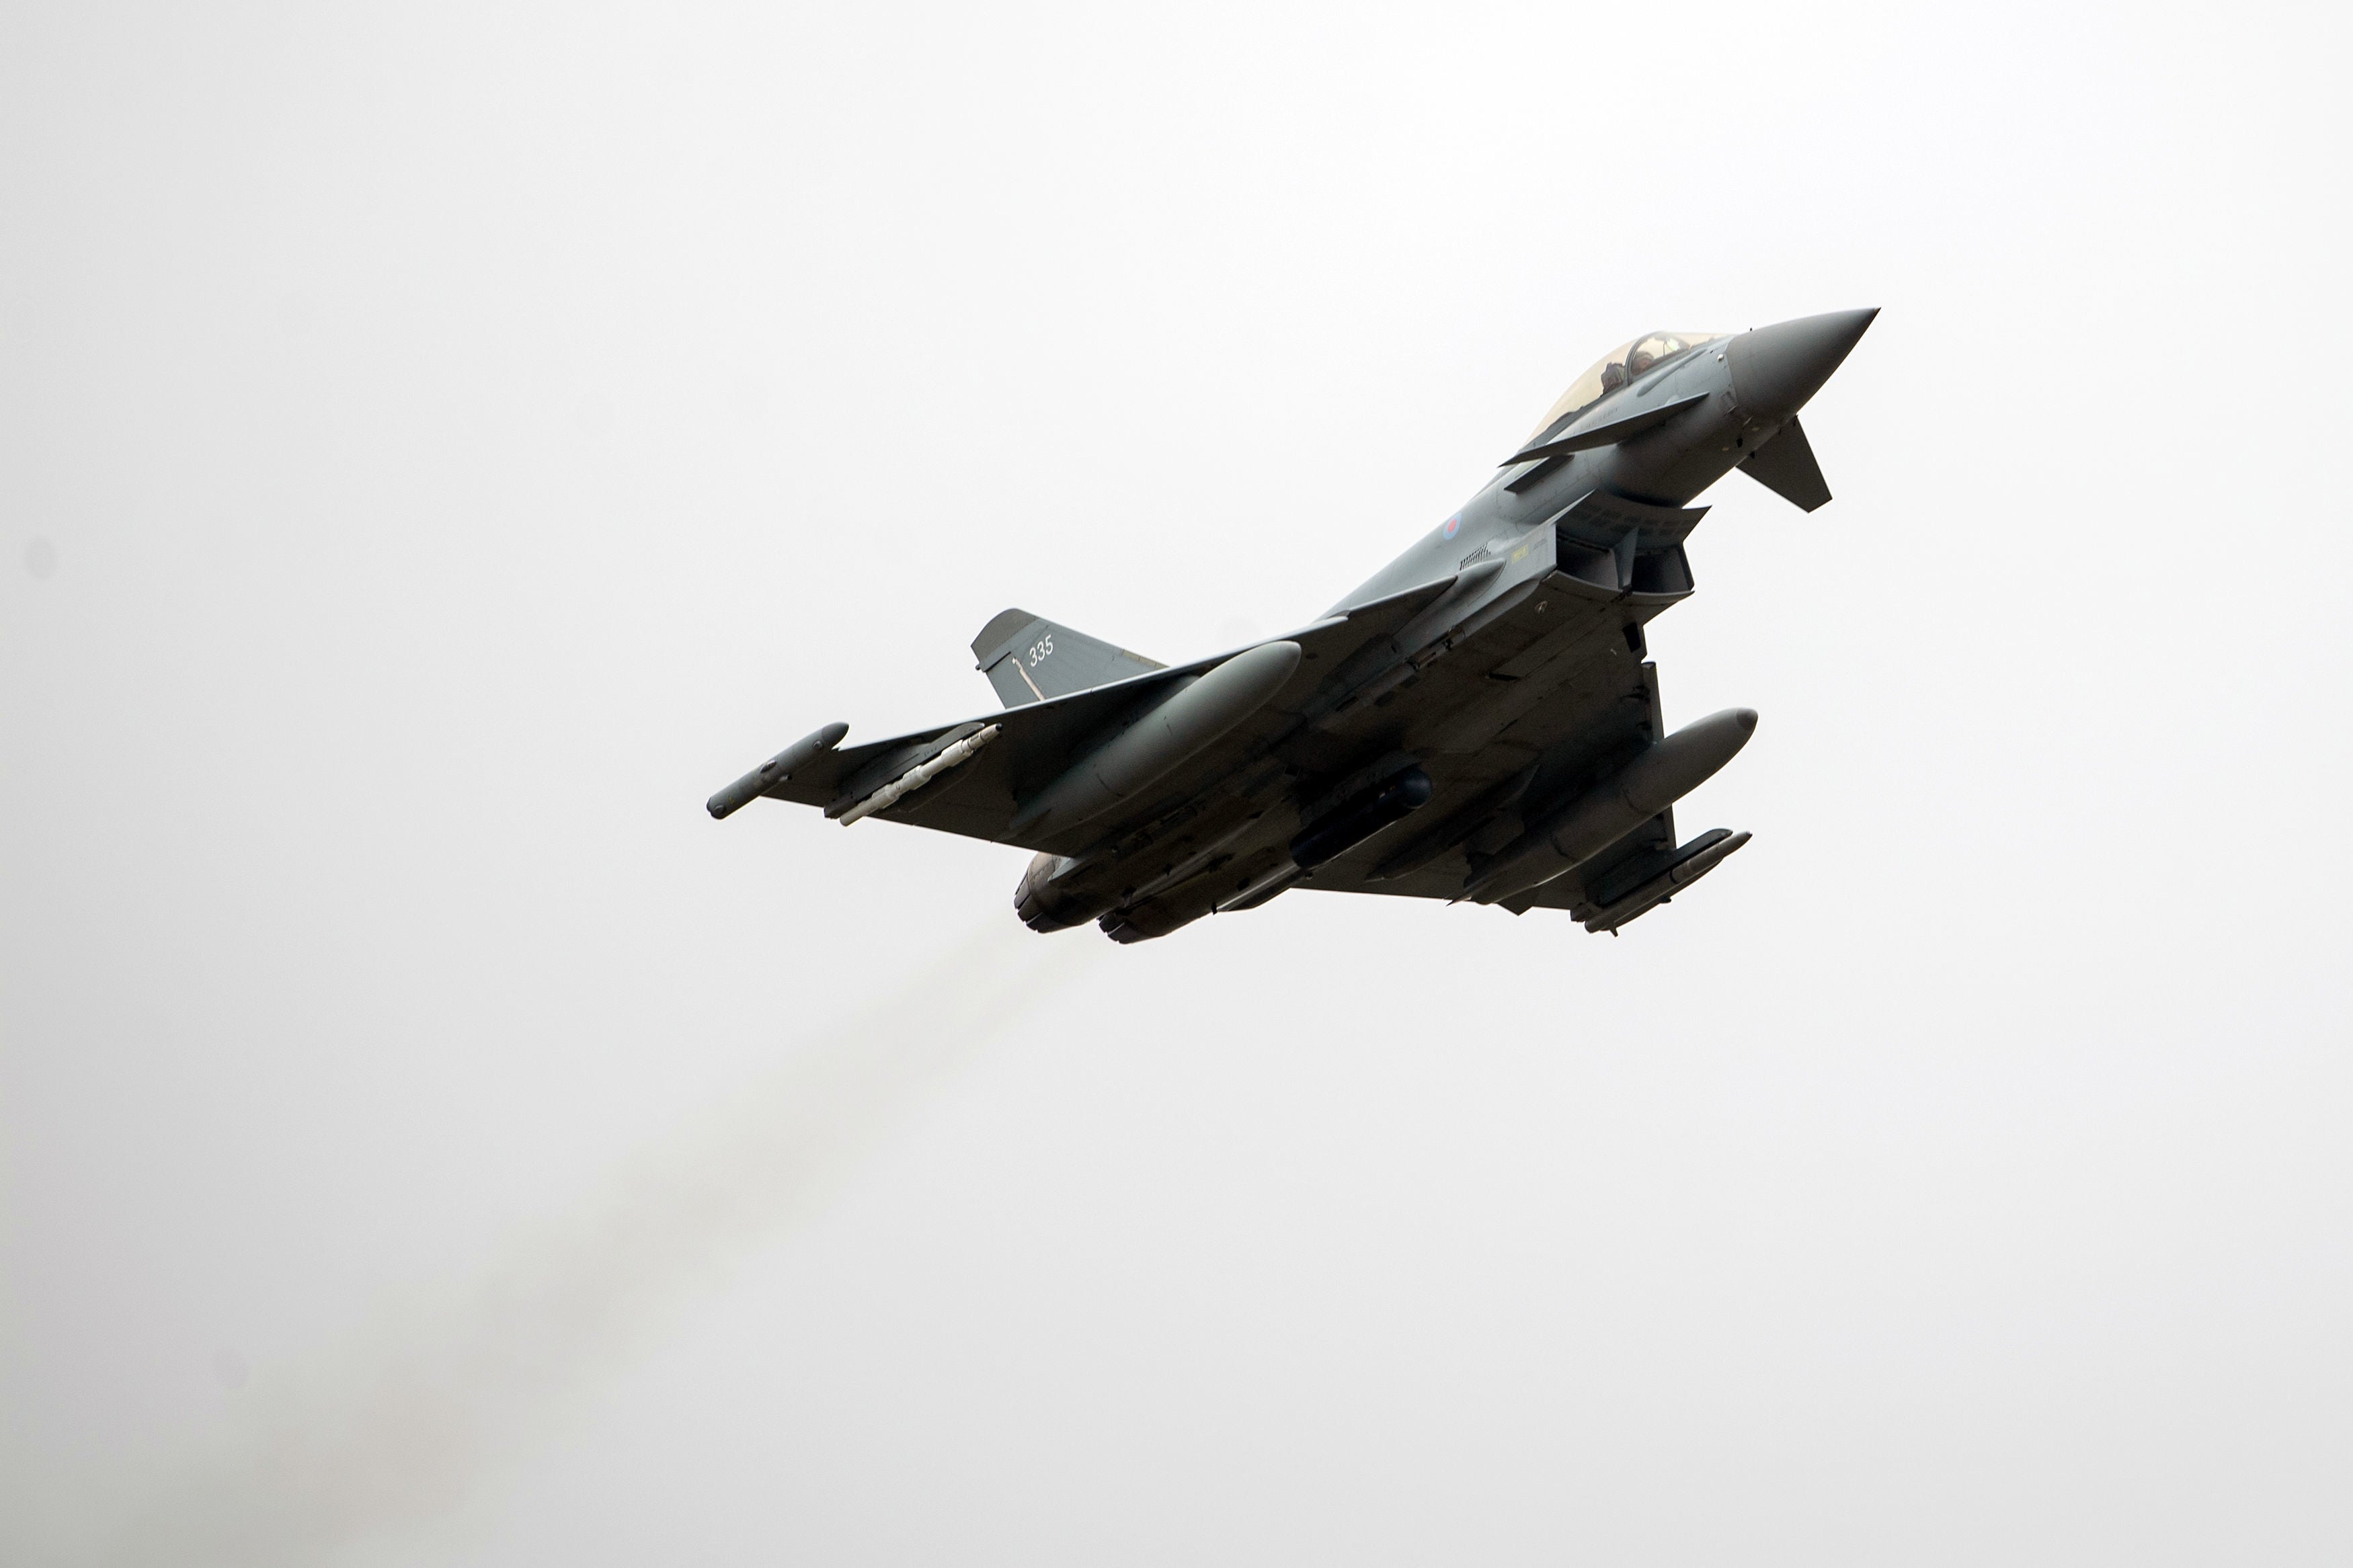 Typhoon FGR4s were used to conduct the air strike, with Storm Shadow missiles being used for the first time in two years